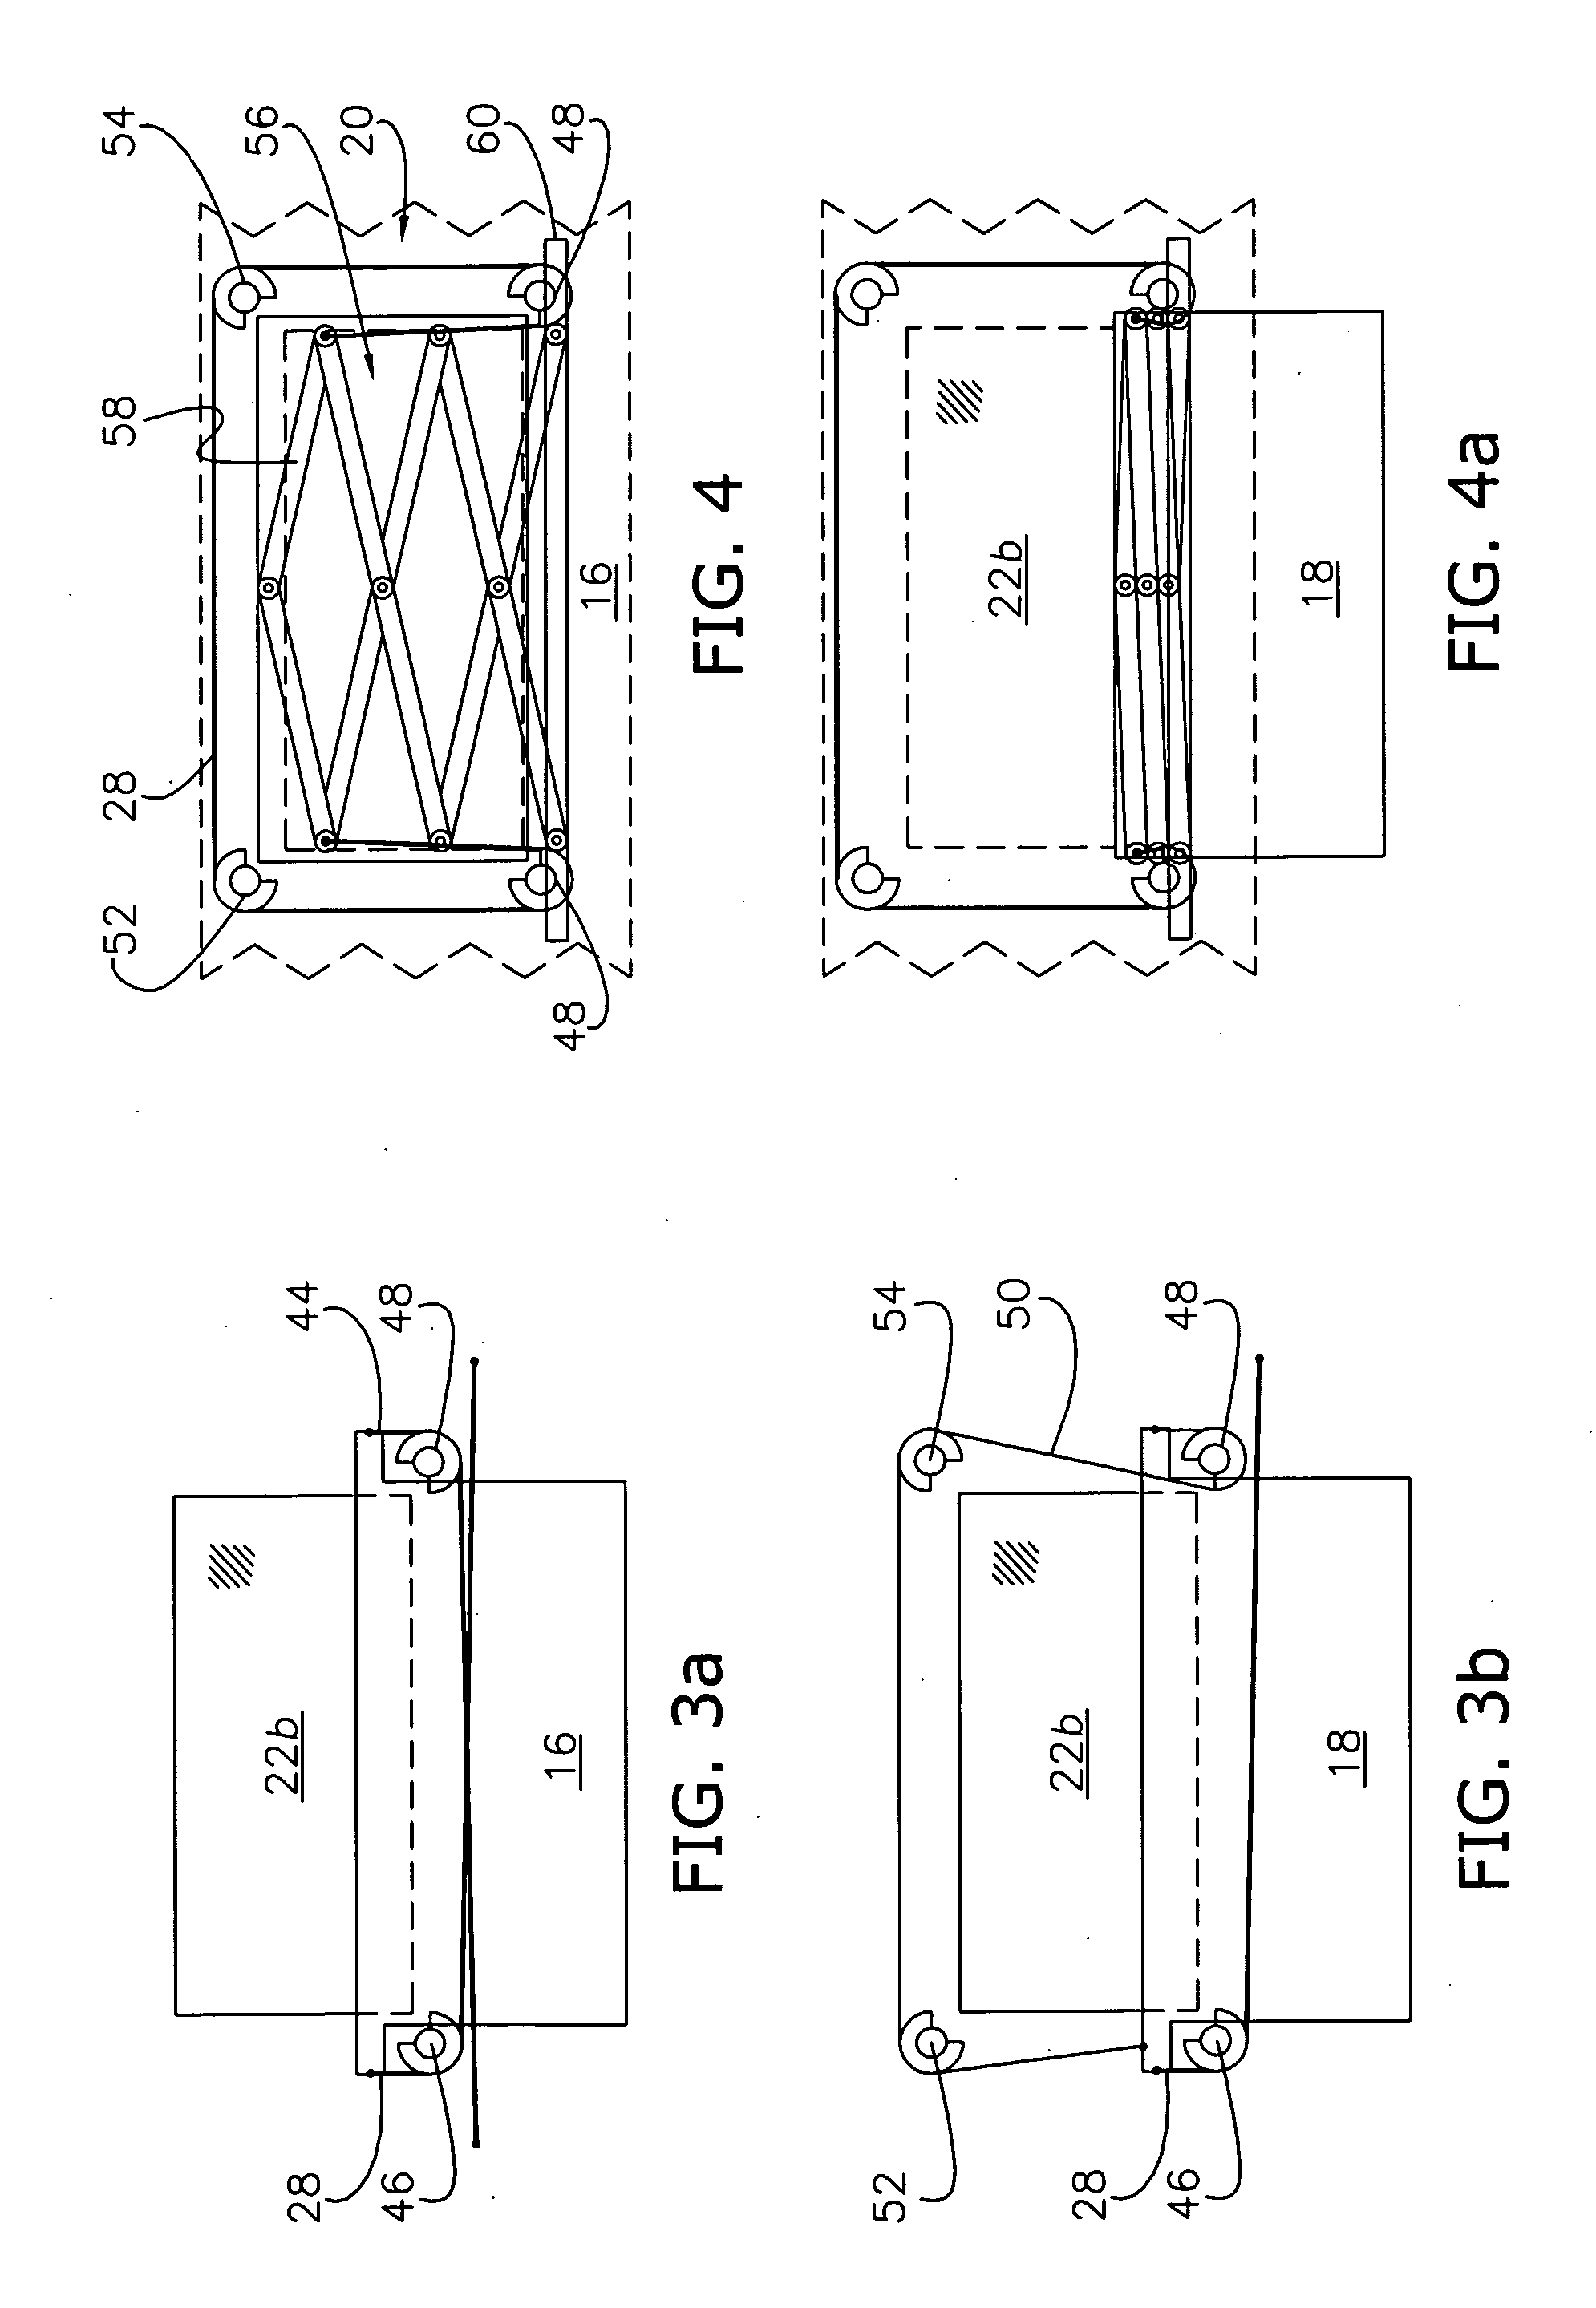 Receiver/emitter cover utilizing active material actuation